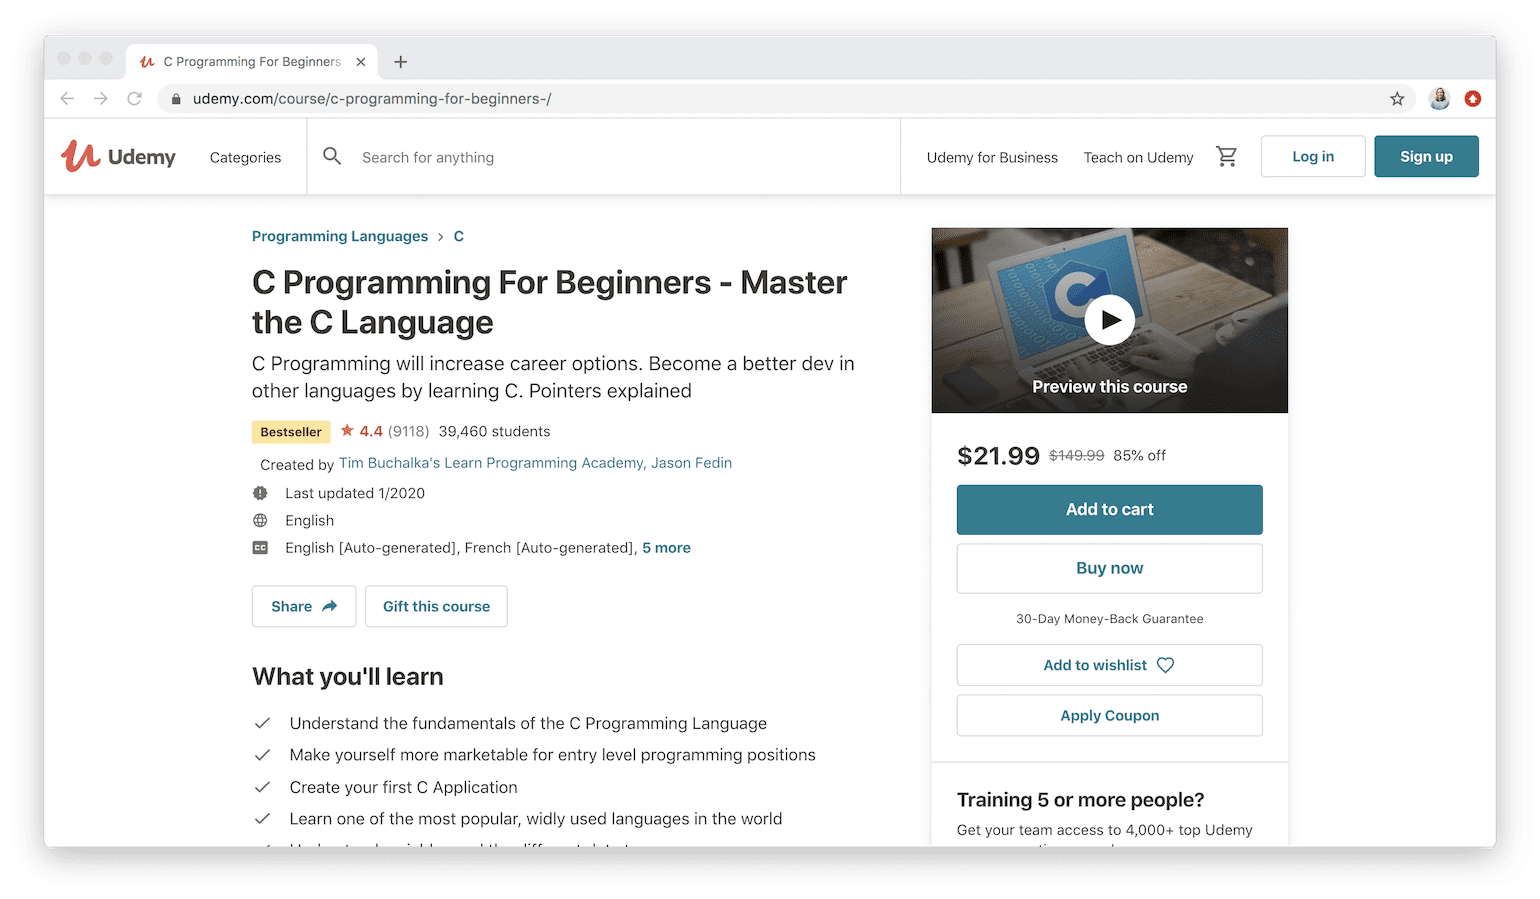 C Programming for Beginners - Master the C Language on Udemy